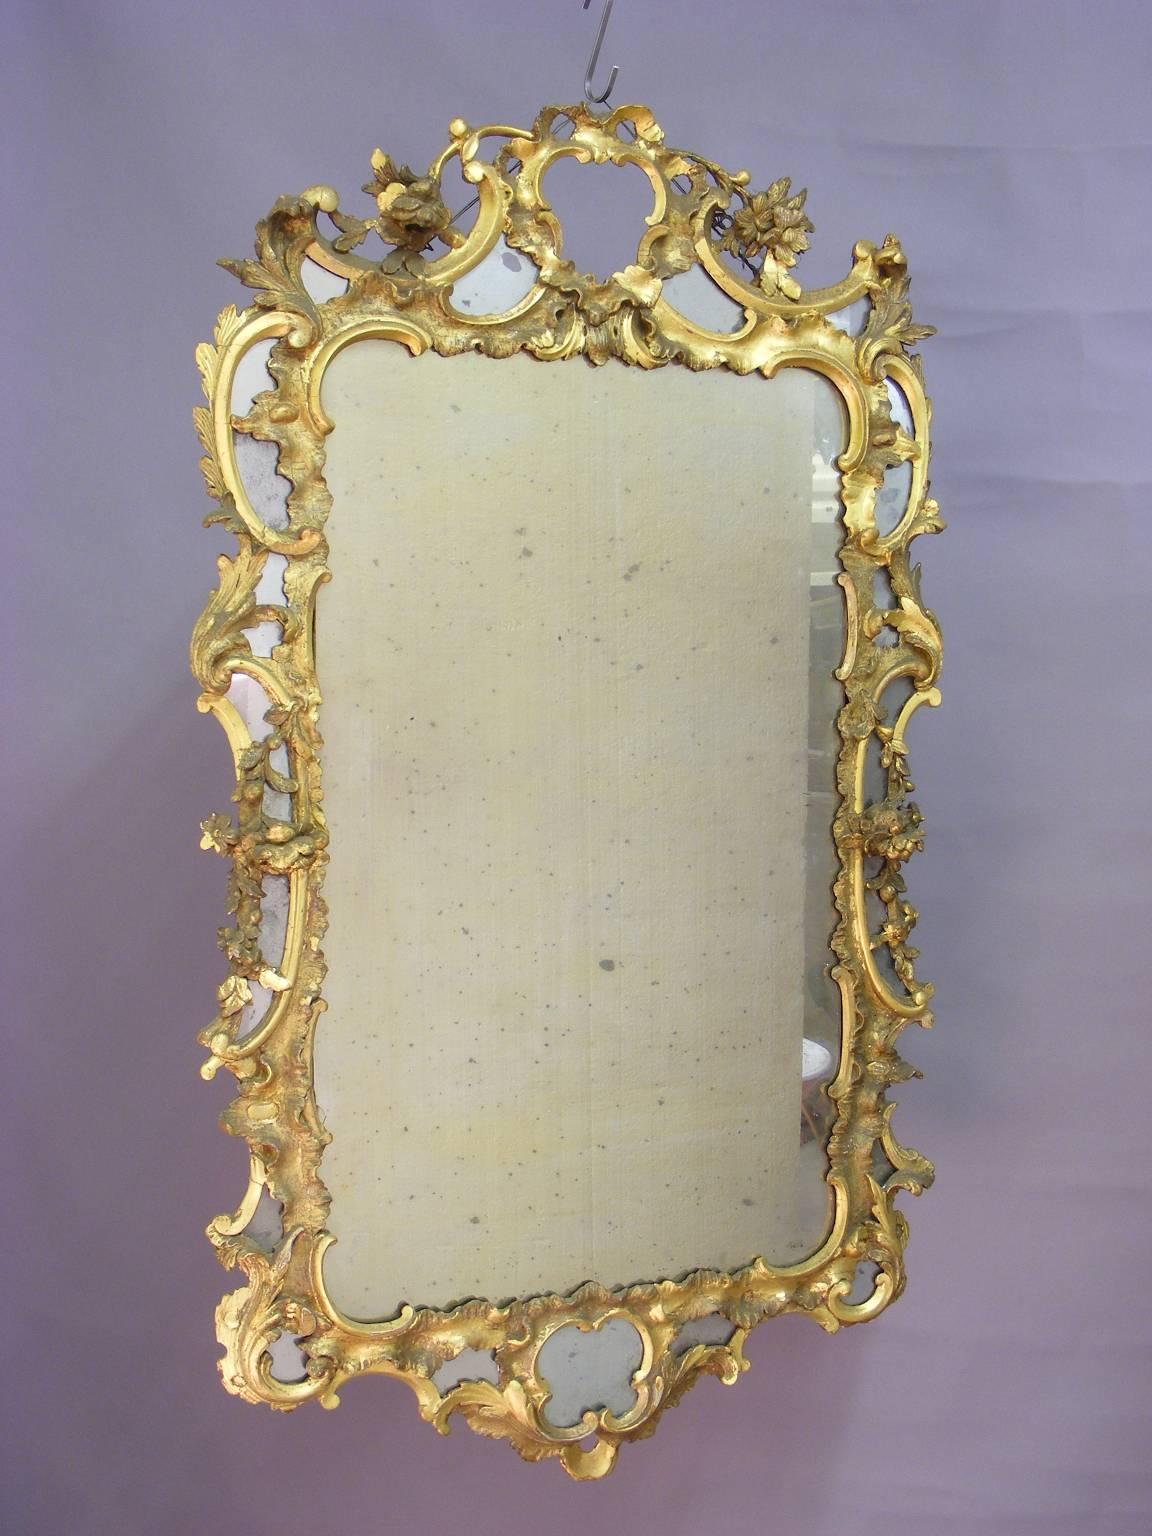 A fine George II original period (circa 1750) wood carved and gilt mirror retaining the original glass. Enclosed within a beautifully carved and gilded frame, this large magnificent piece is adorned with ‘C’ scrolls, foliated and floral decoration.